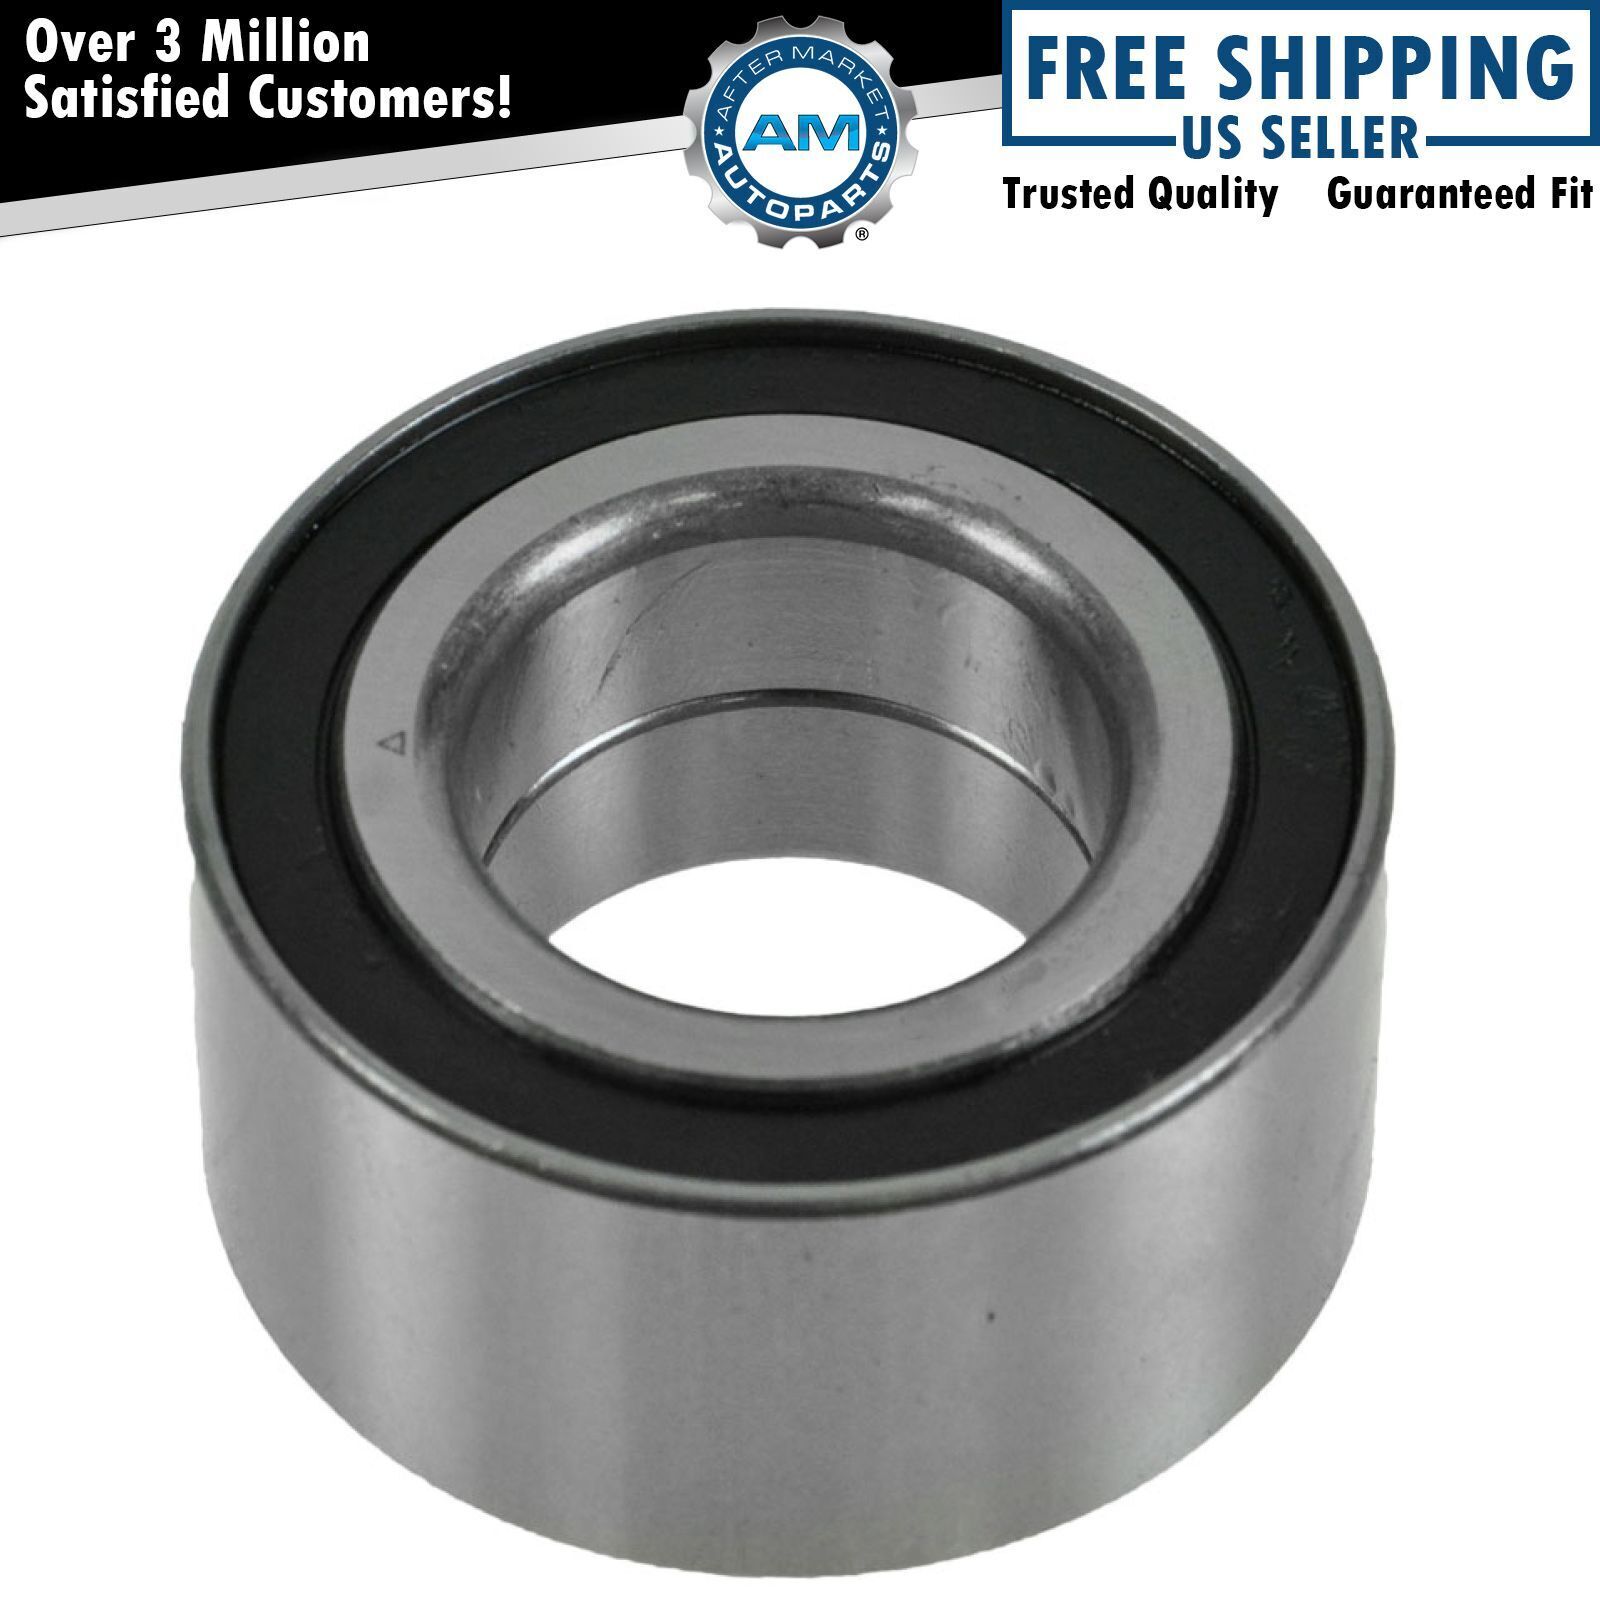 Wheel Bearing Left or Right for Ford Contour Mercury Cougar Volvo S40